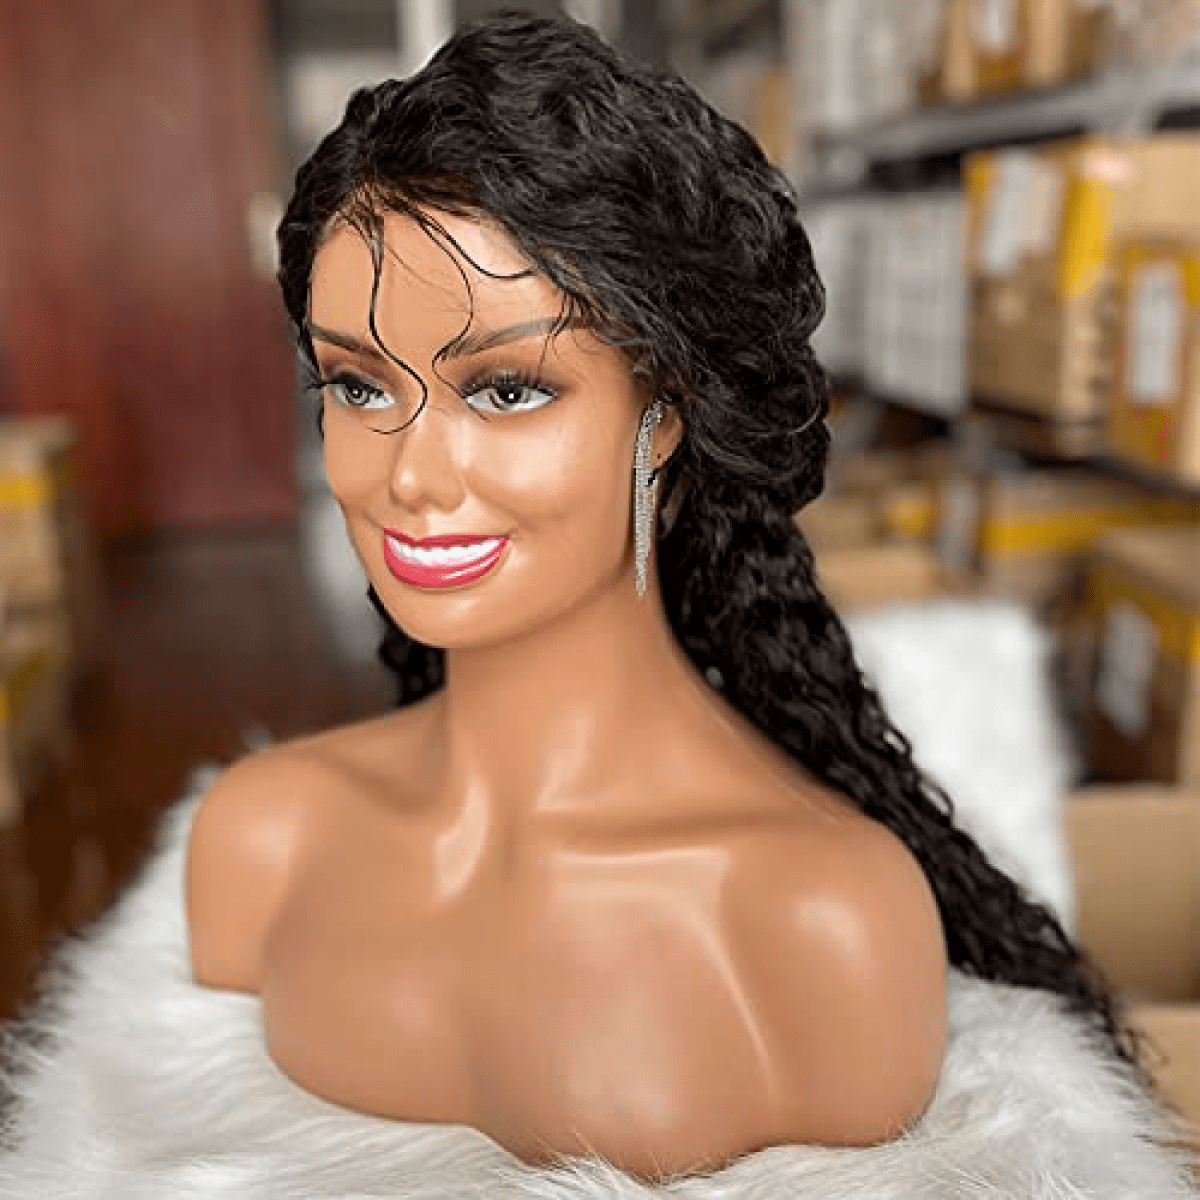 Buy Sale Display Clothes Plastic Wig Female Mannequin Head With Shoulders  from Shenzhen Modifashion Display Products Ltd, Pakistan